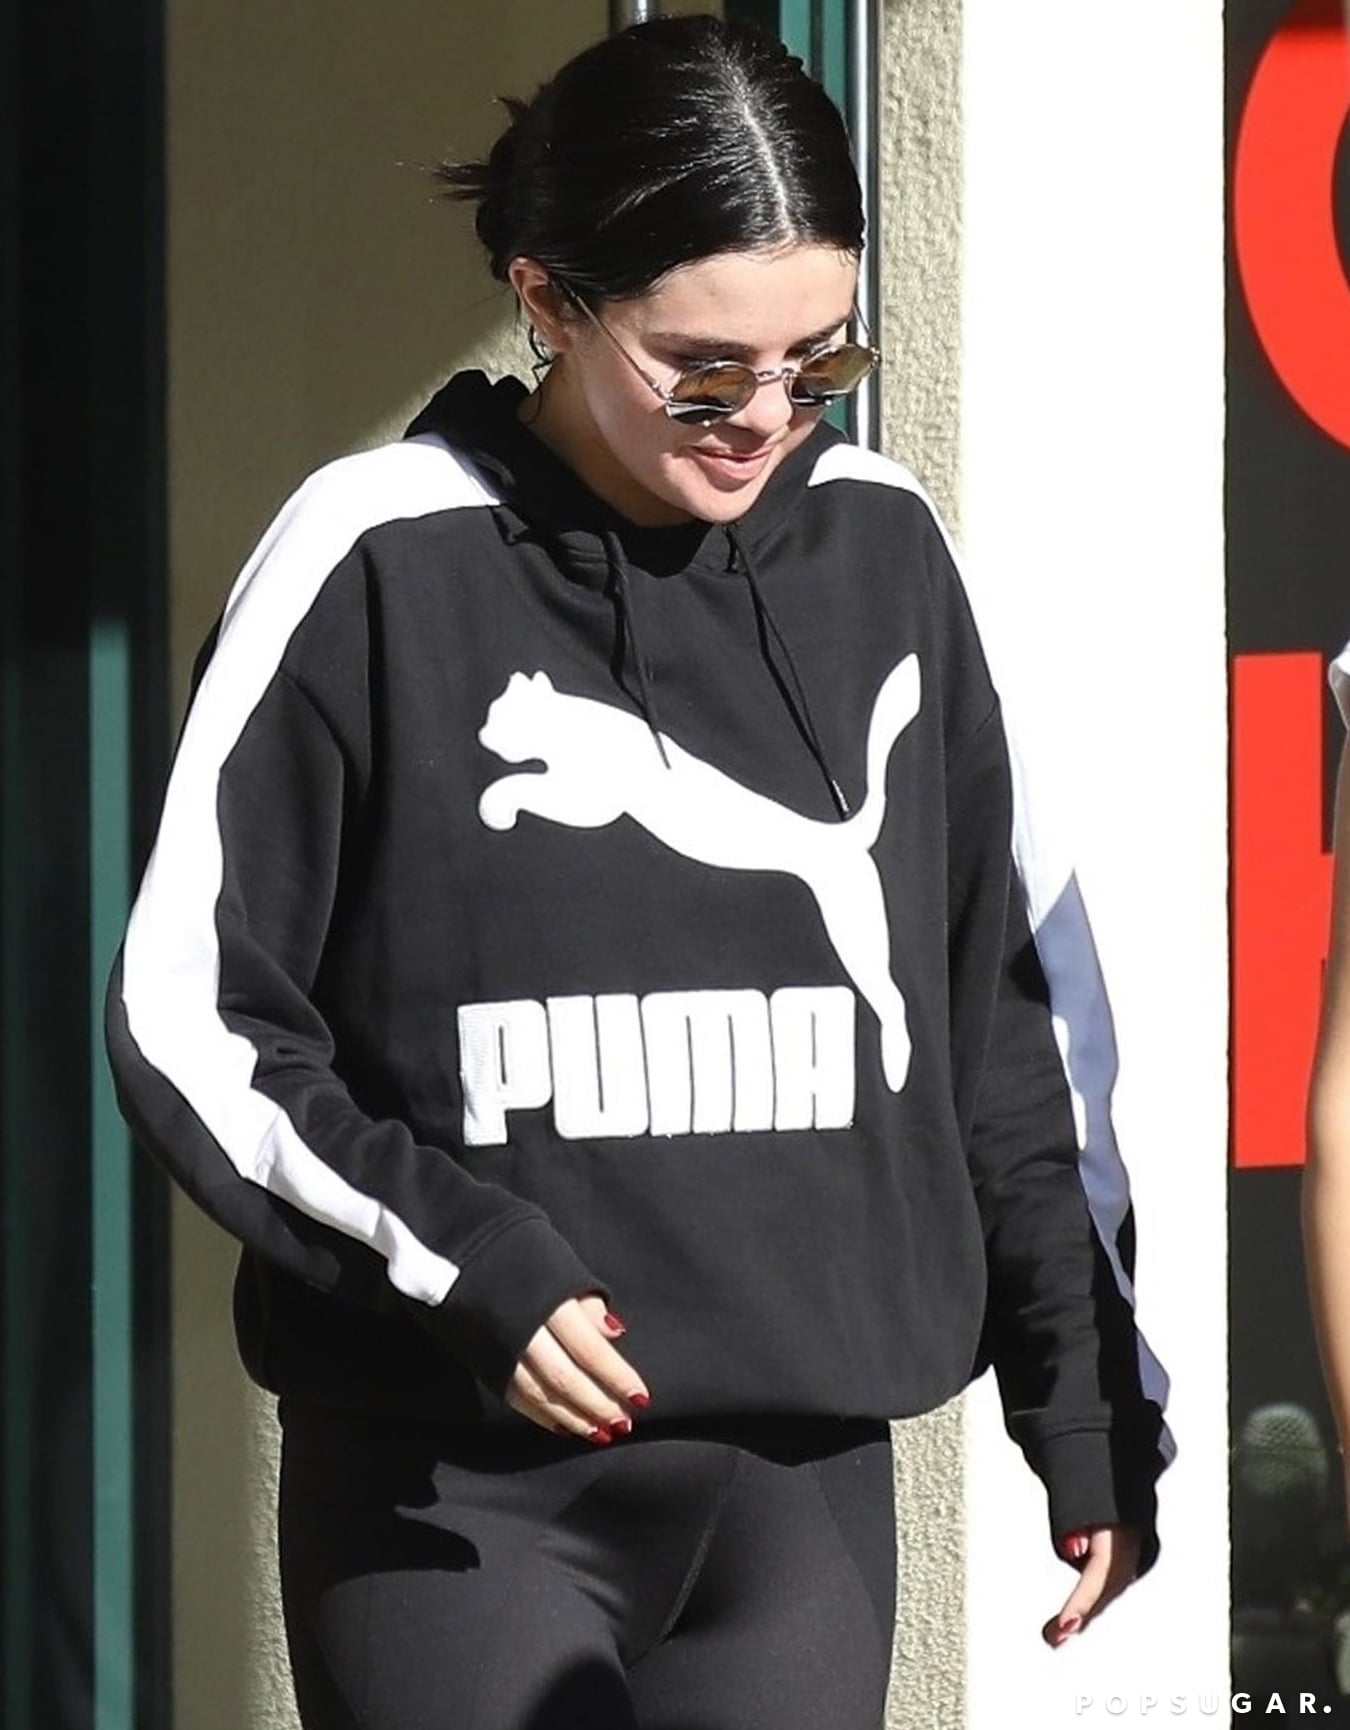 Selena Gomez Looked Amazing in a Sports Bra and Puma Leggings While Out  Hiking